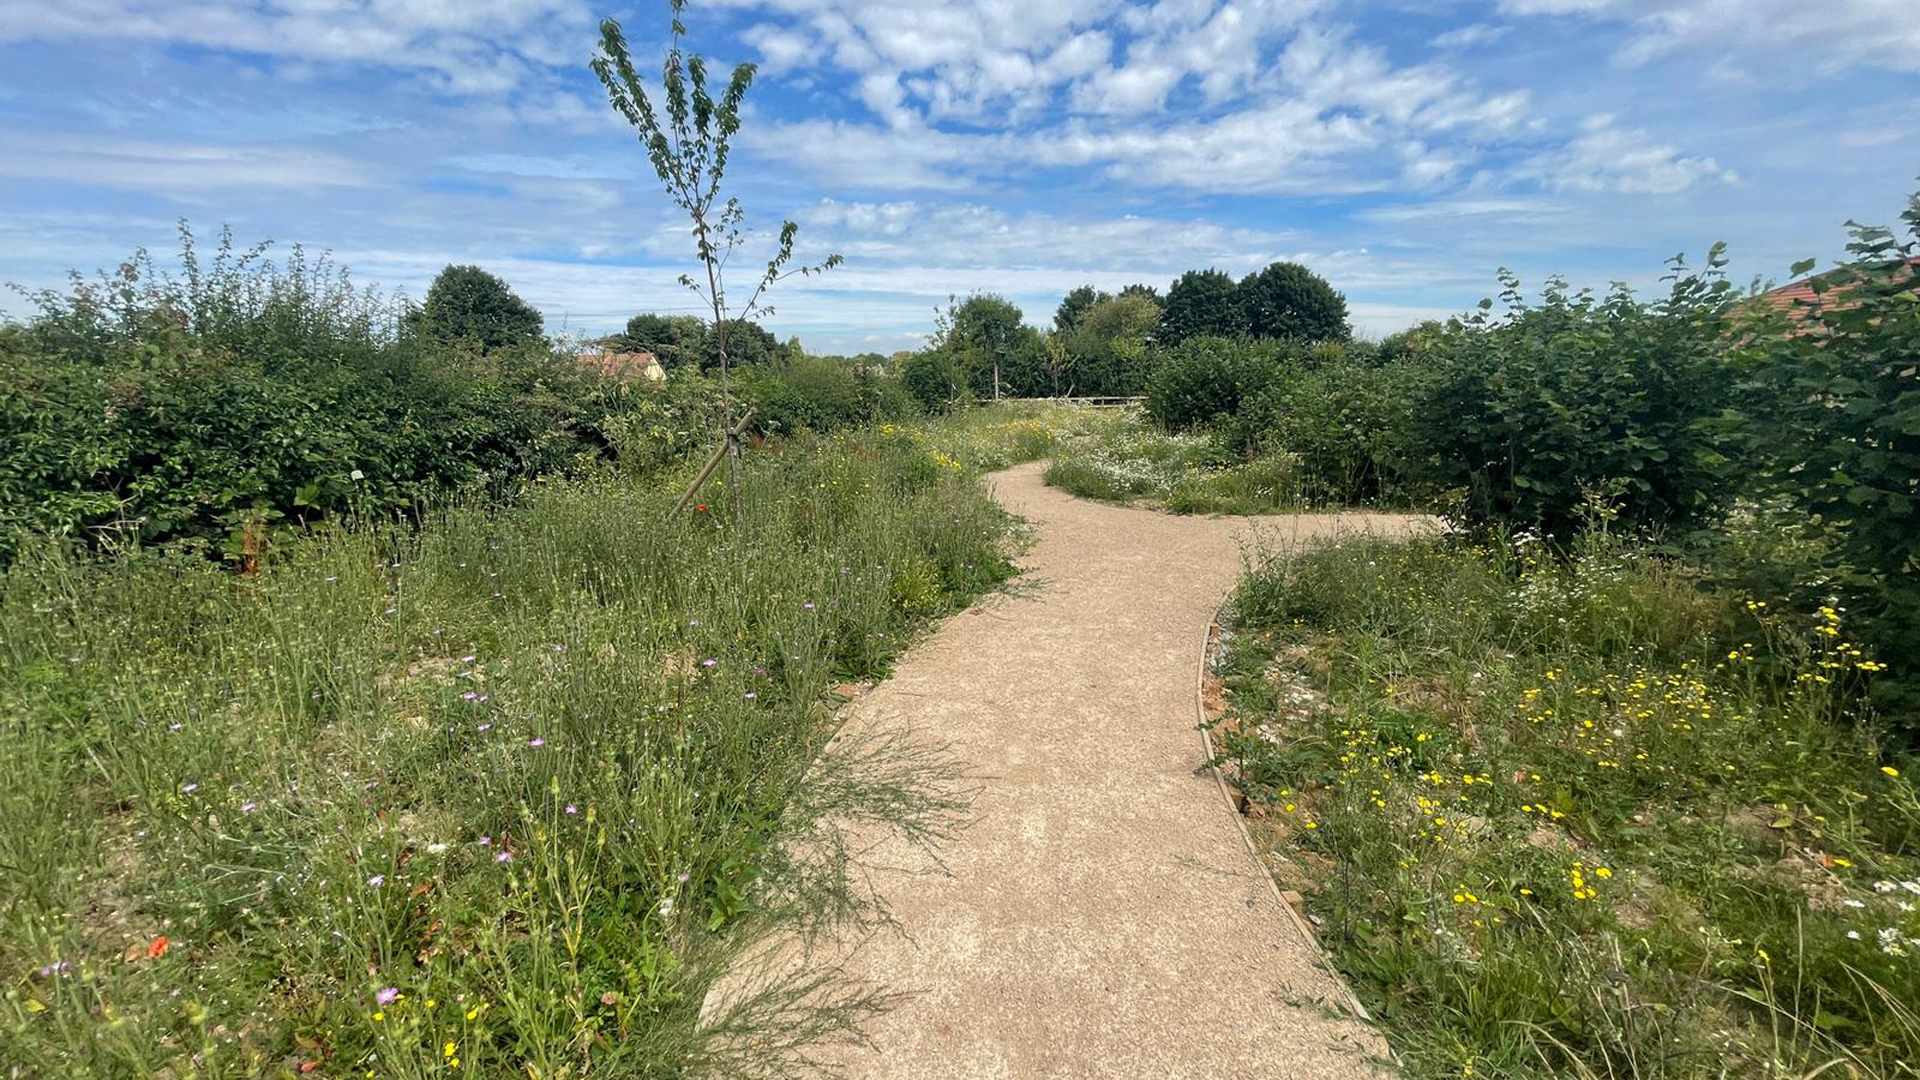 Wildflower garden with winding path and blue sky